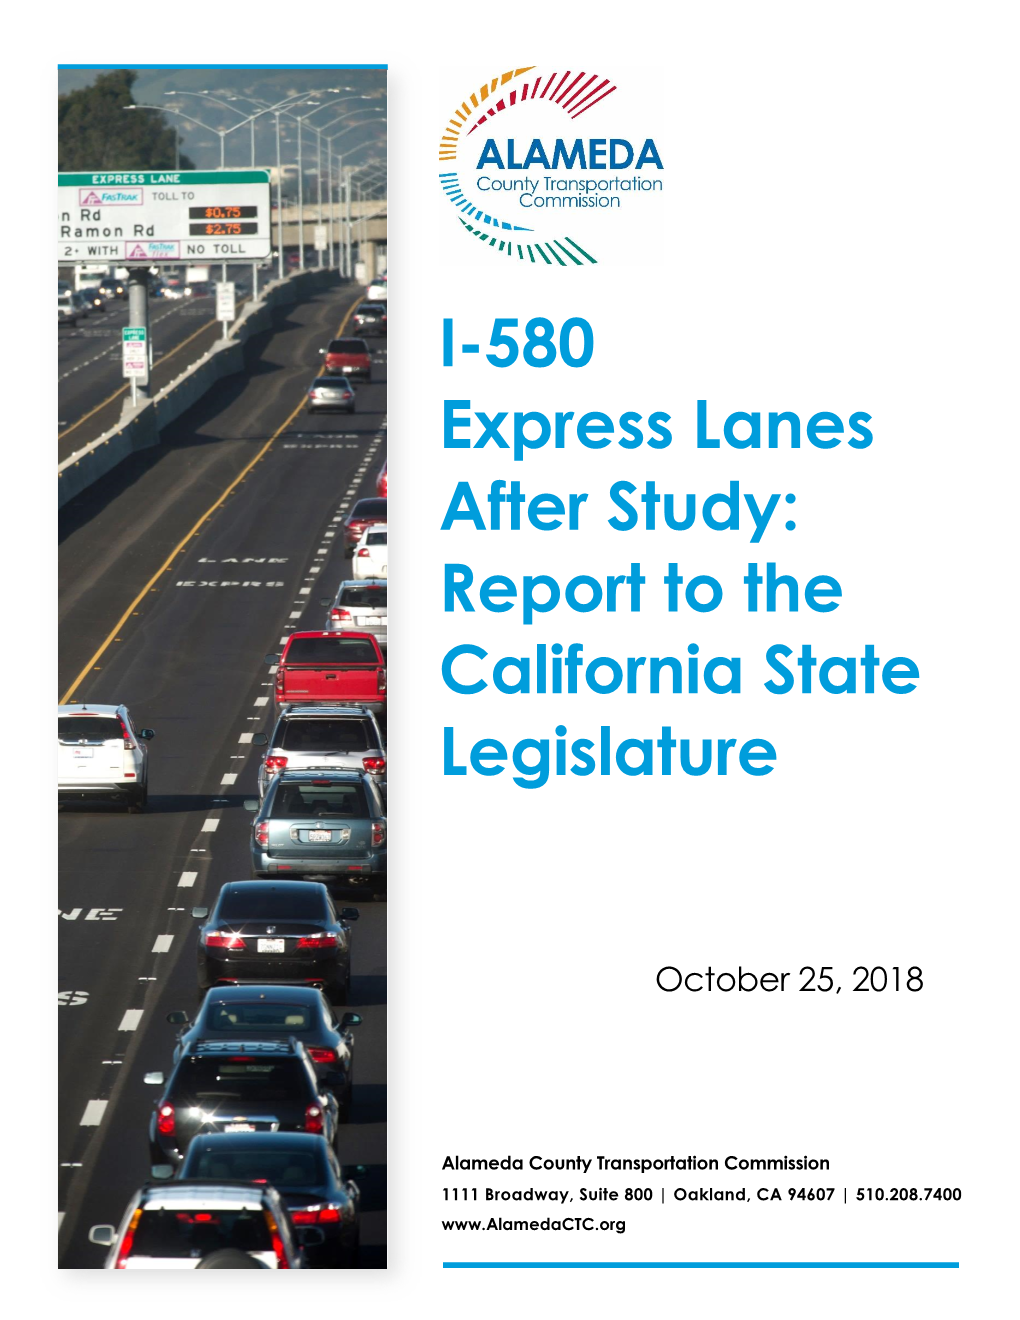 I-580 Express Lanes After Study: Report to the California State Legislature